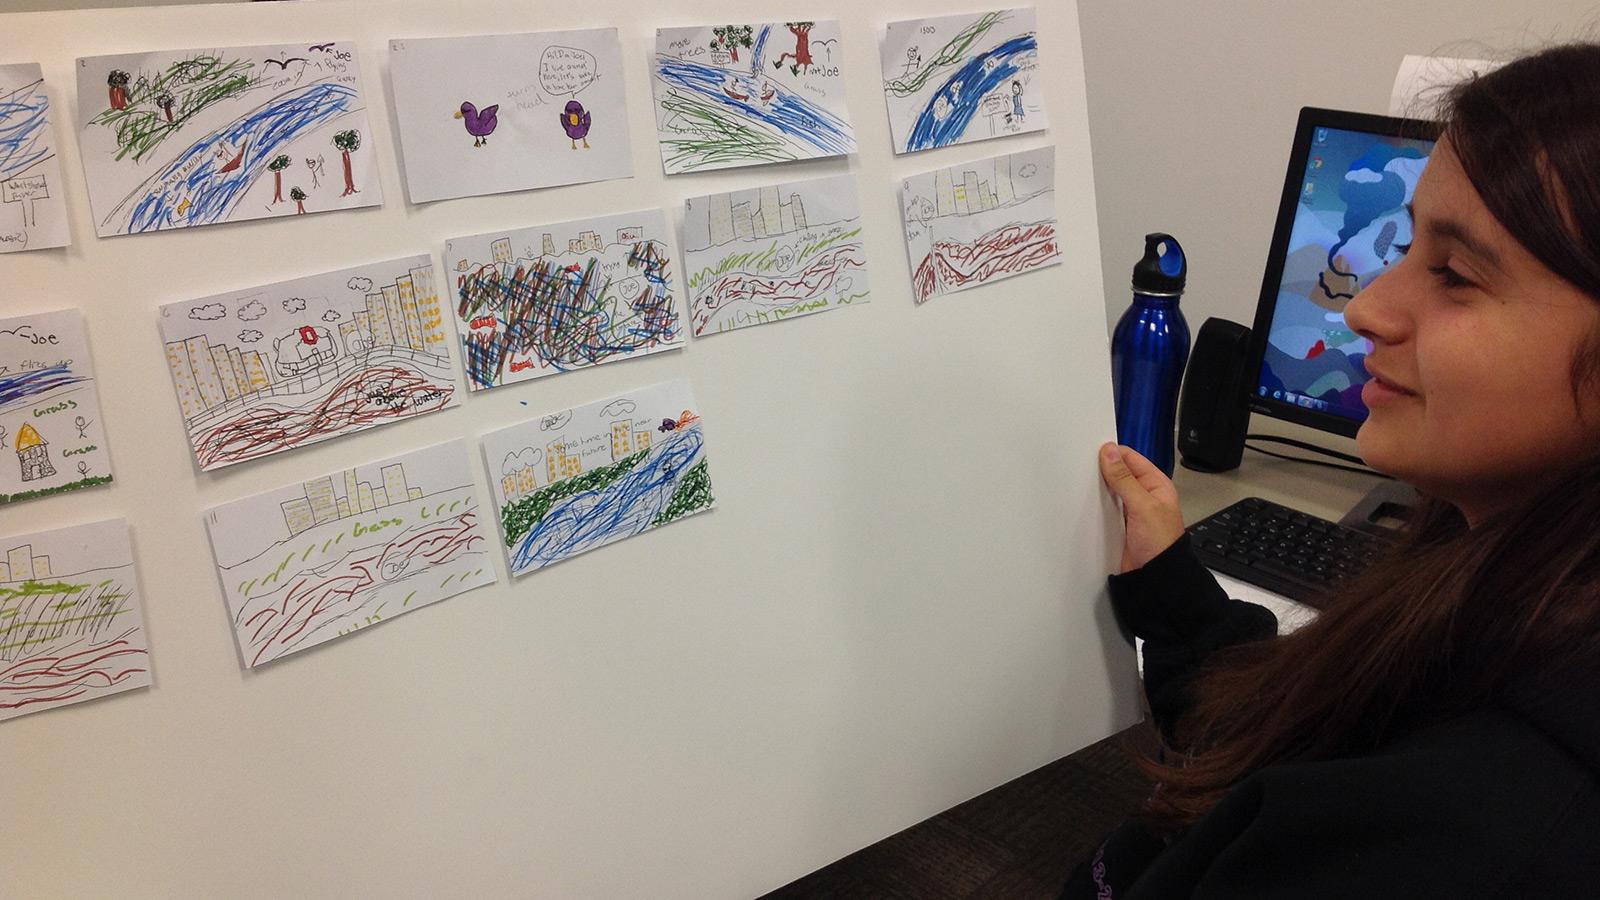 Student showing hand drawn sketches on storyboard